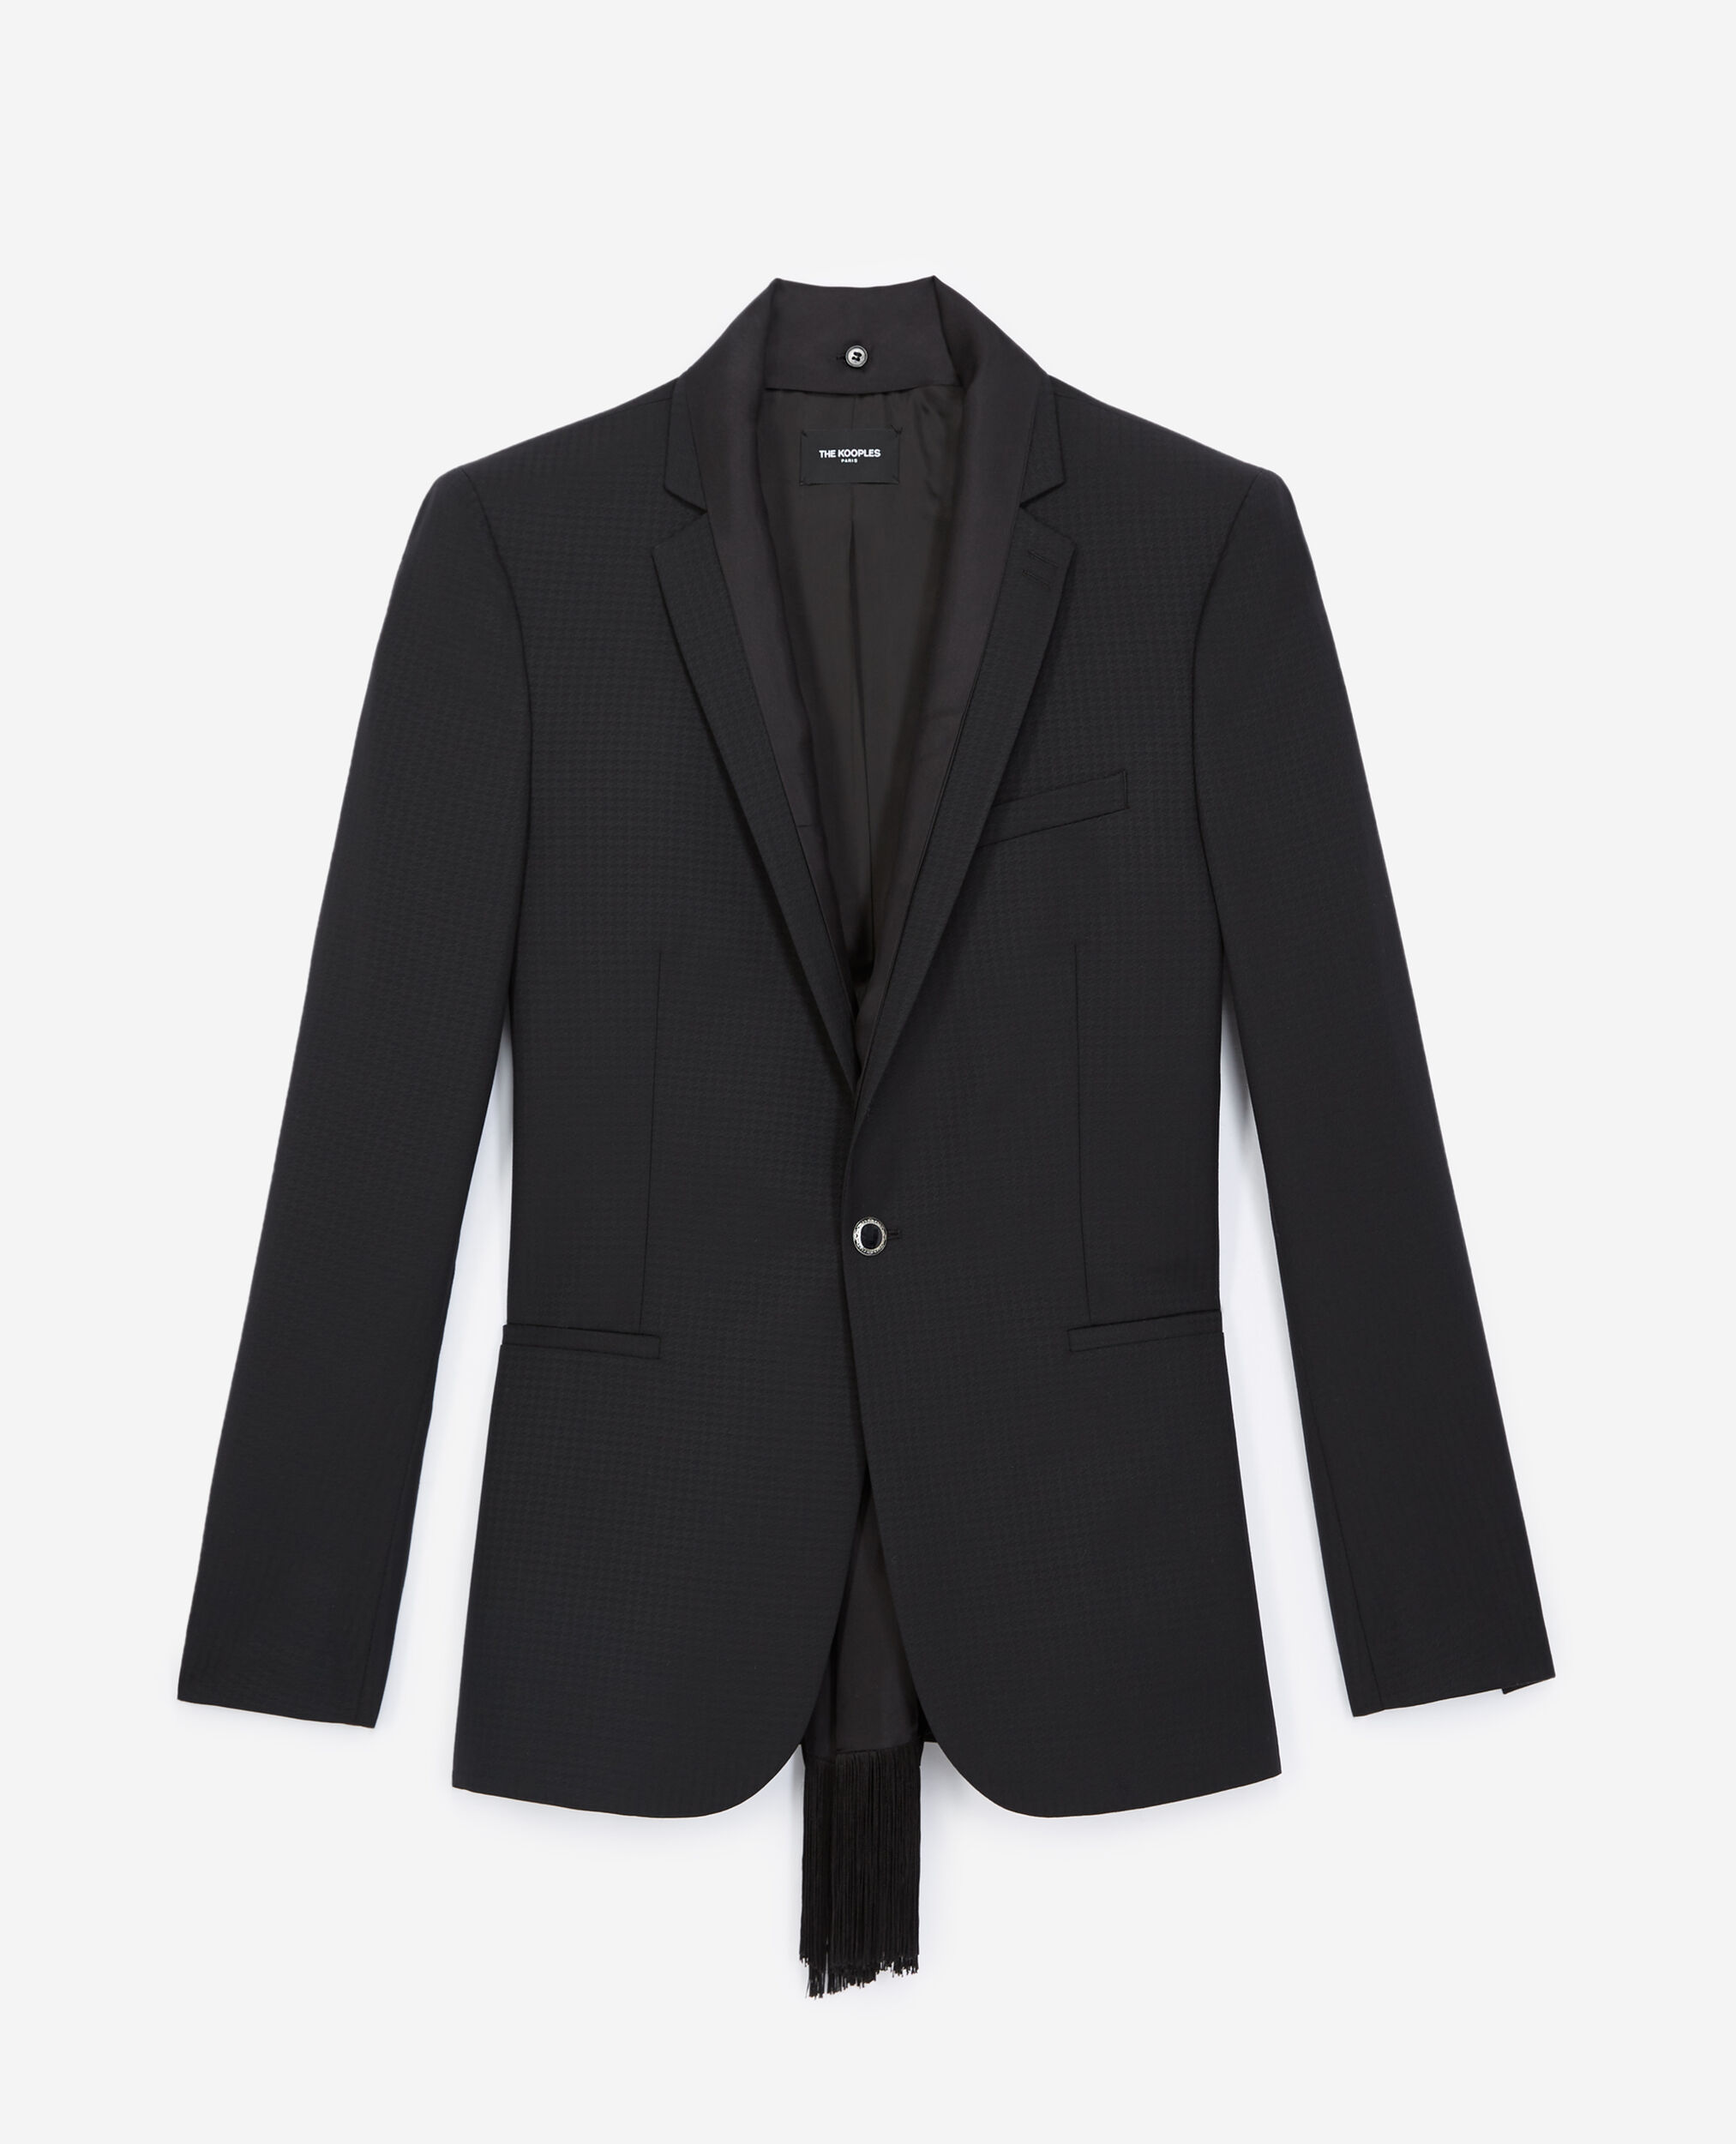 Black wool jacket with jewel buttons | The Kooples